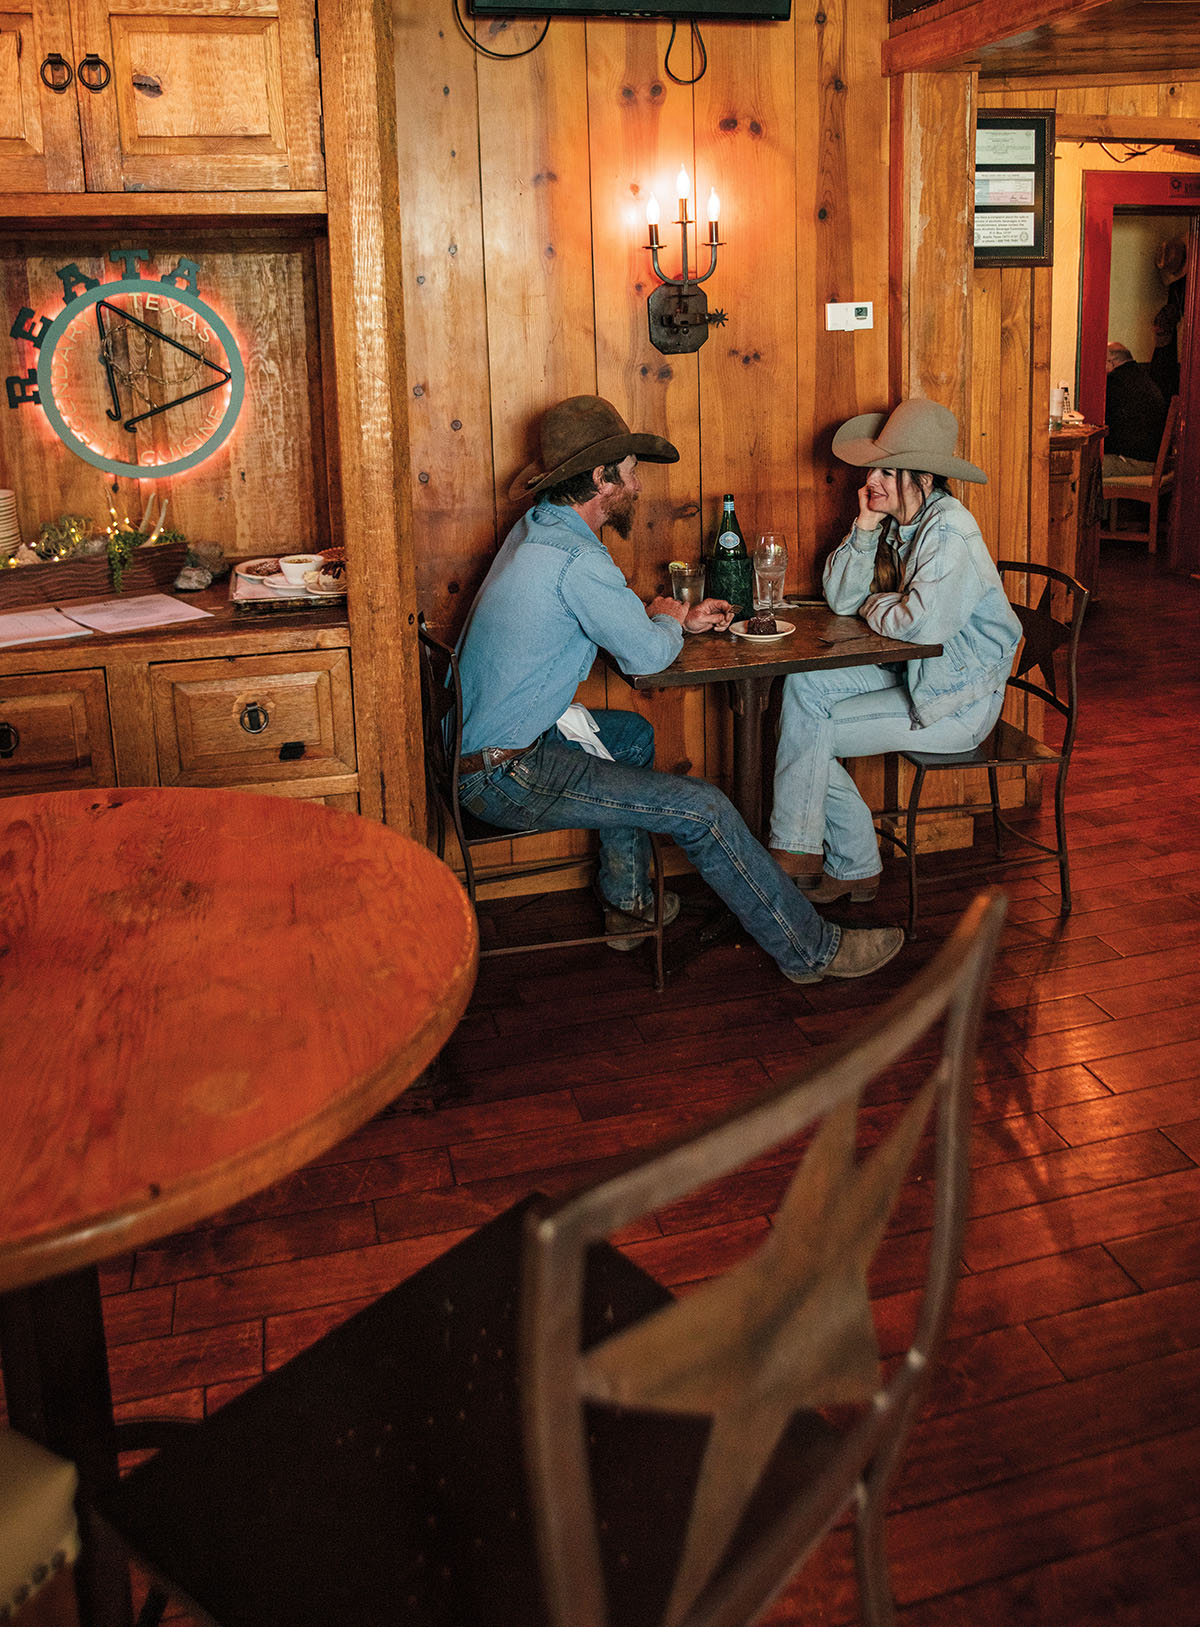 Two people wearing denim sit at a table in a wood-paneled restaurant